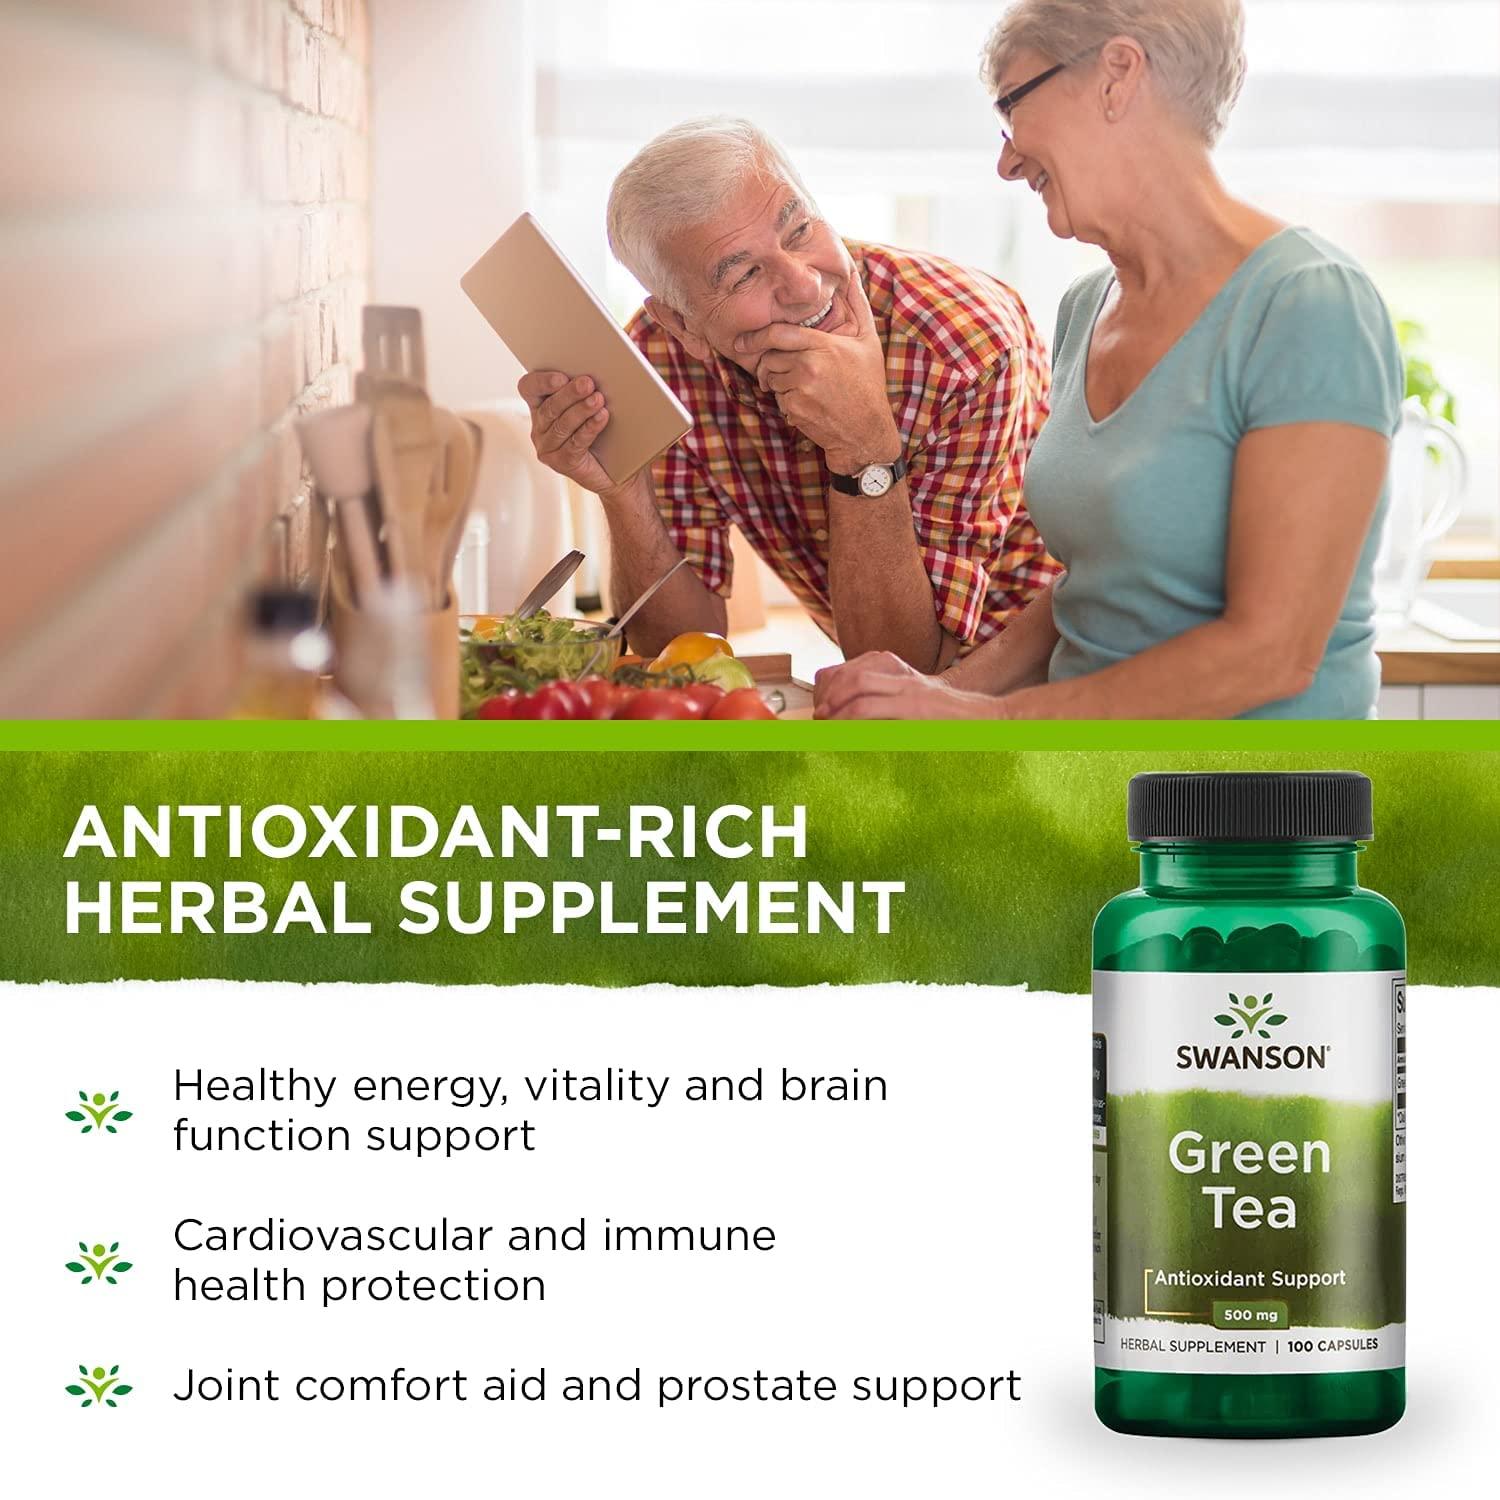 Antioxidant-rich herbal extracts